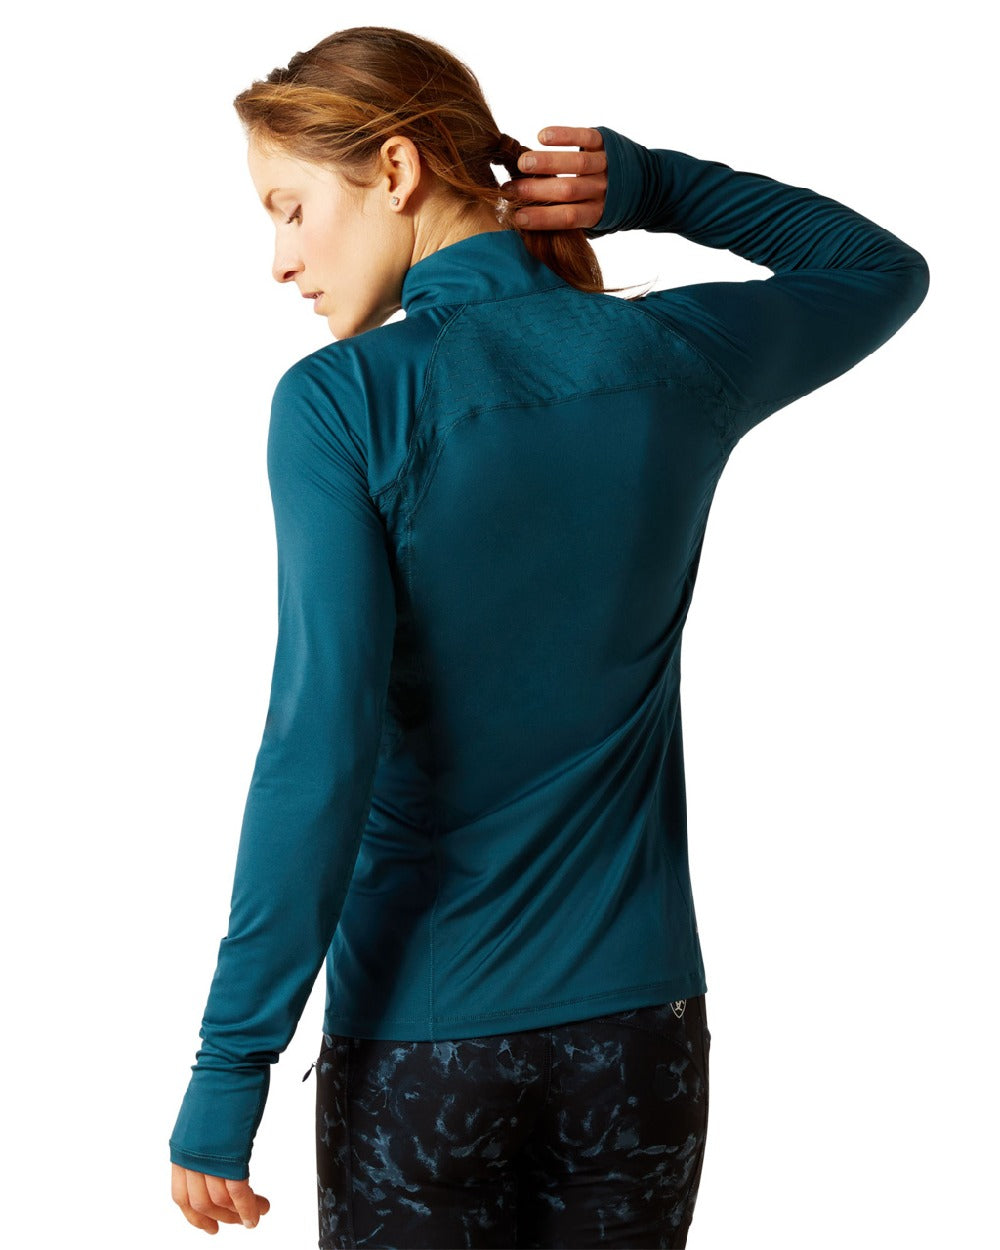 Ariat Womens Lowell 2.0 1/4 Zip Long Sleeve Base Layer in Reflecting Pond 